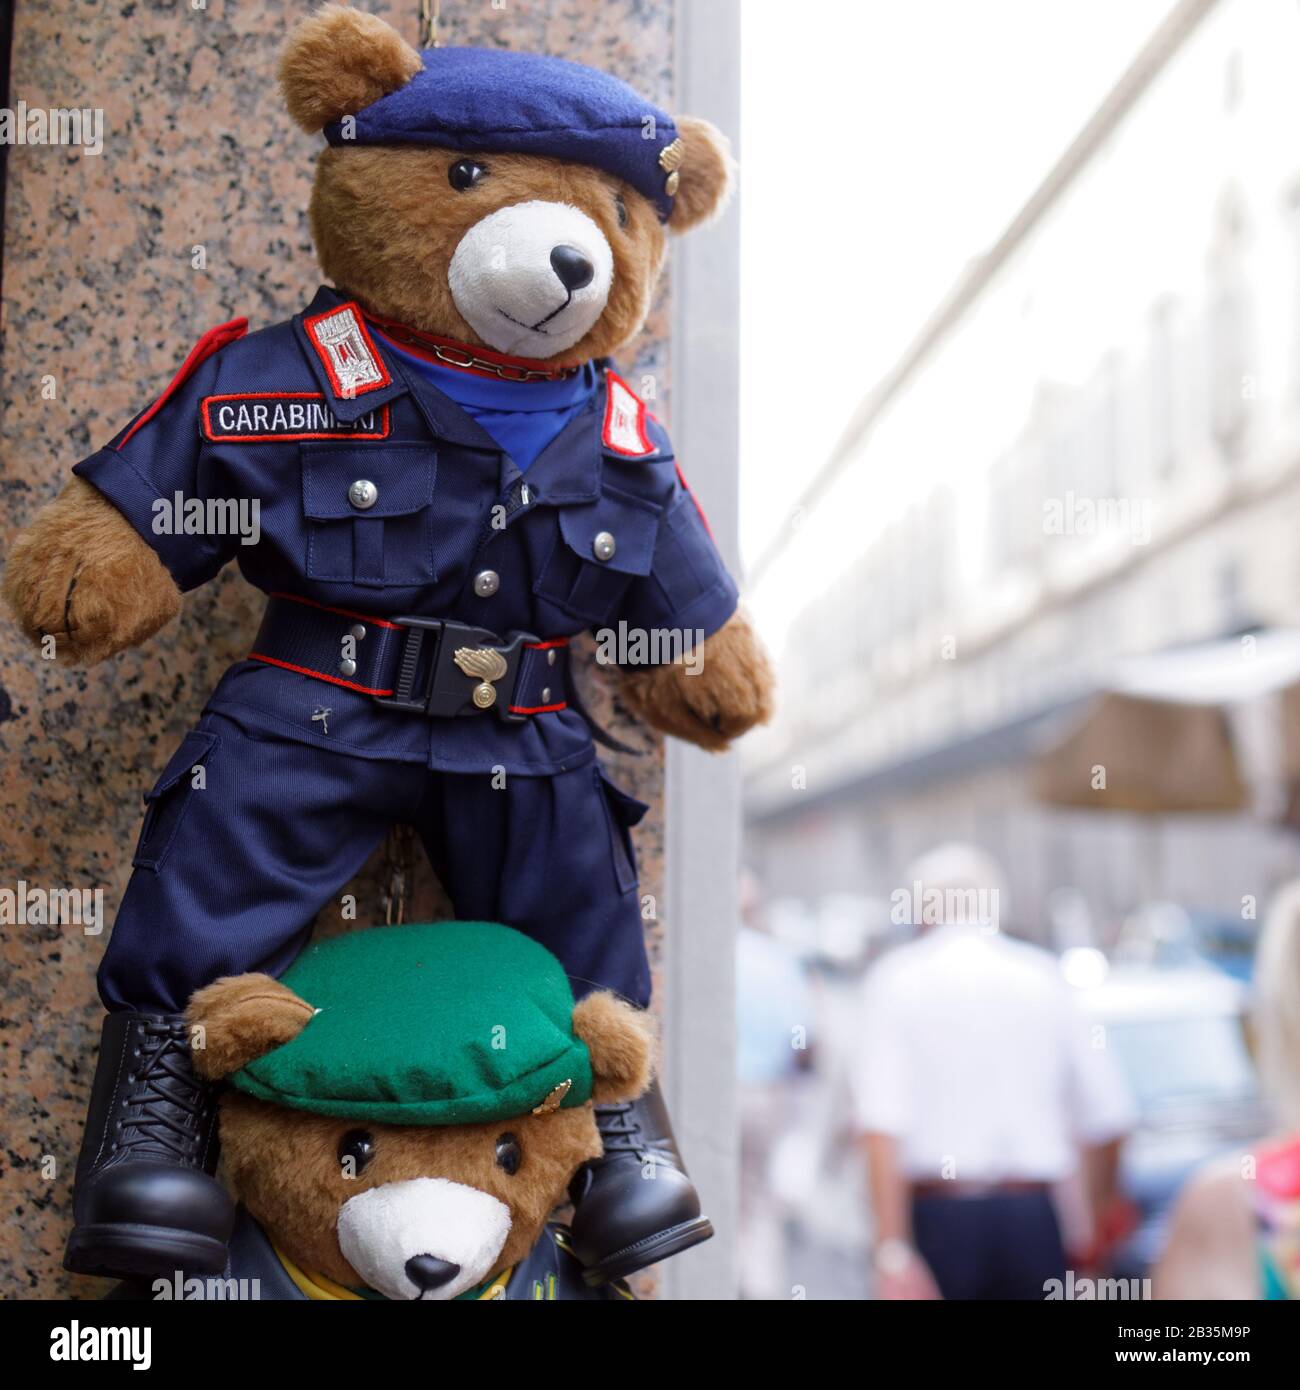 Teddy bears dressed in uniform of Italian Carabinieri at the entrance to a toy shop in Florence, Italy Stock Photo